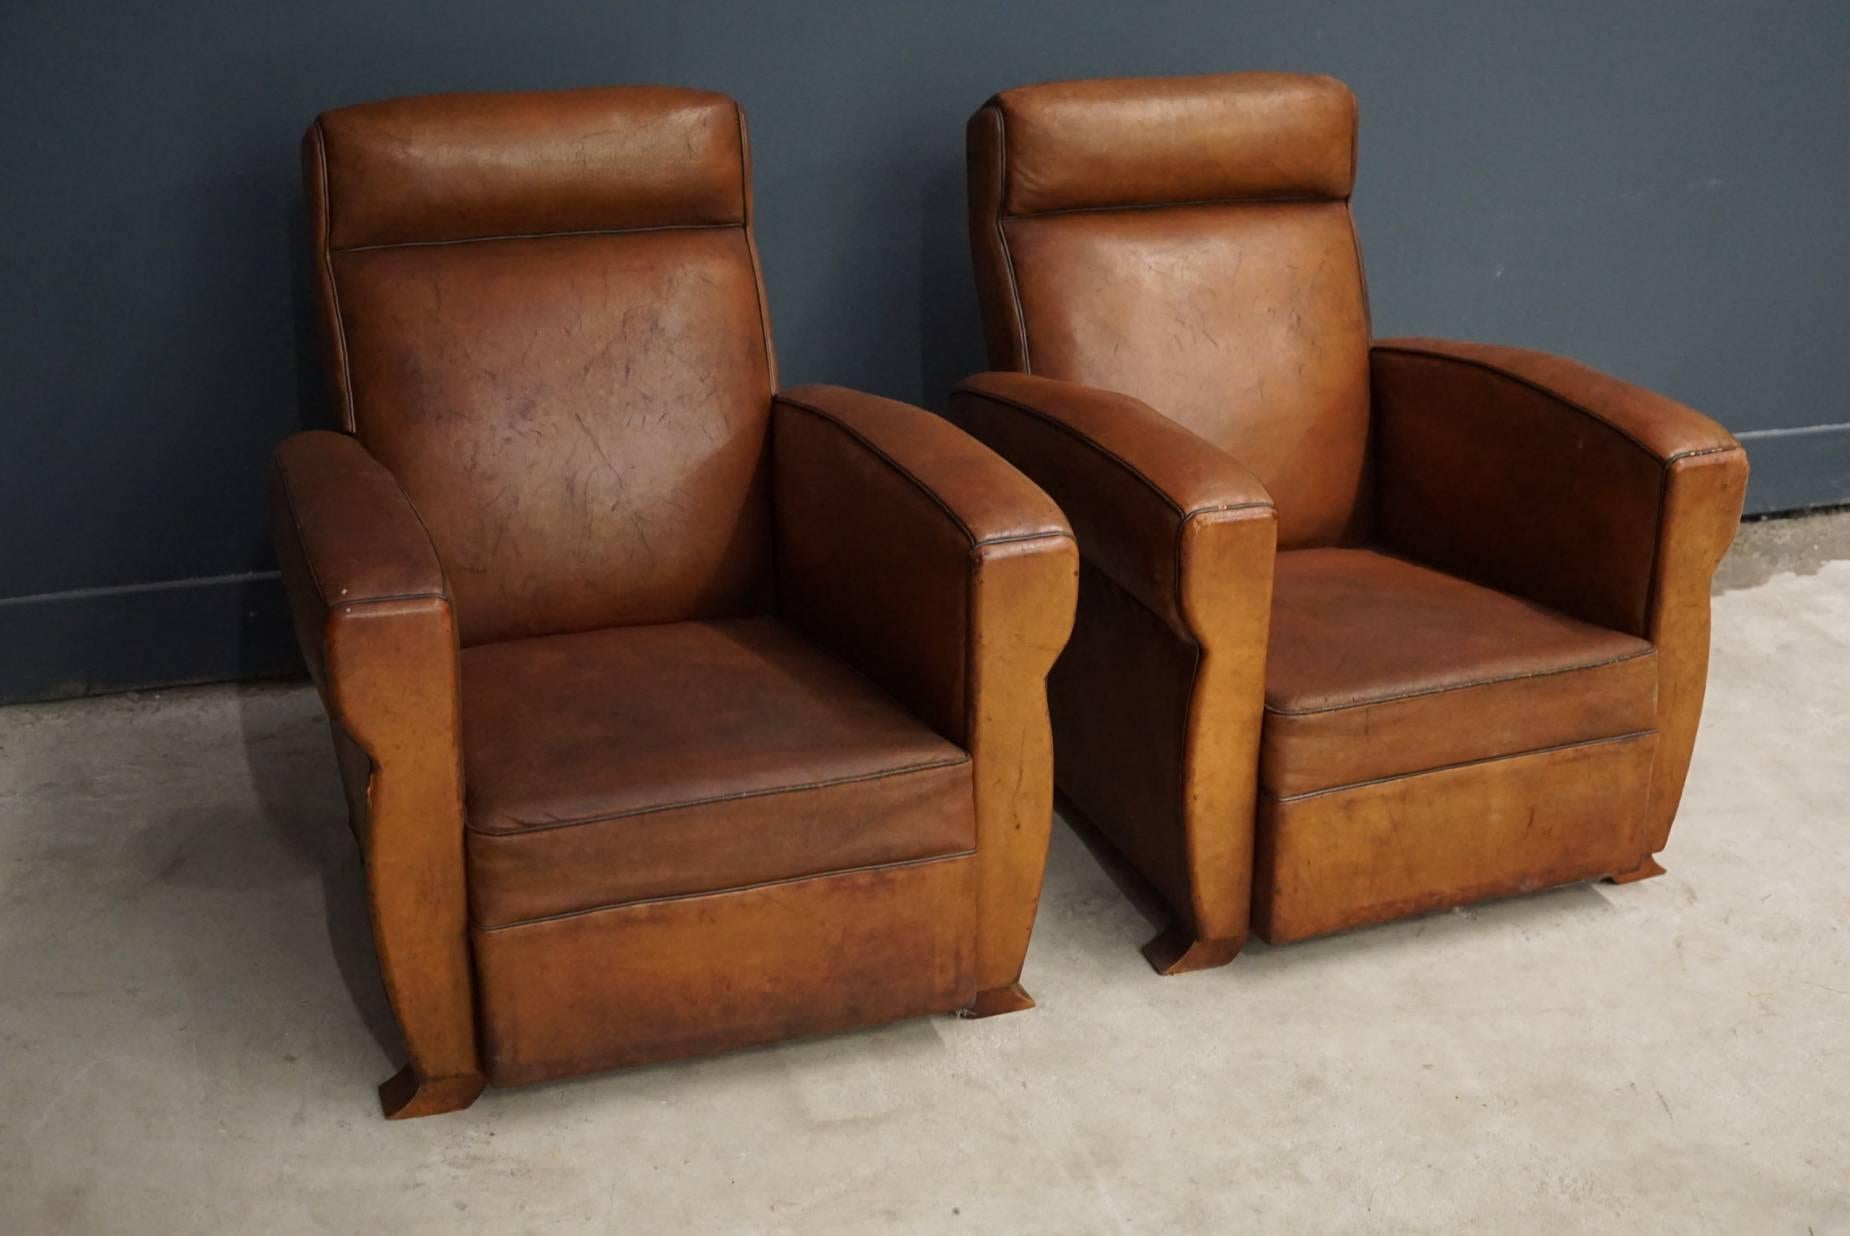 These club chairs were designed and produced in France during the 1940s. The chairs are made from cognac leather held together with metal pins and mounted on wooden legs. The chairs are in a vintage well used condition.